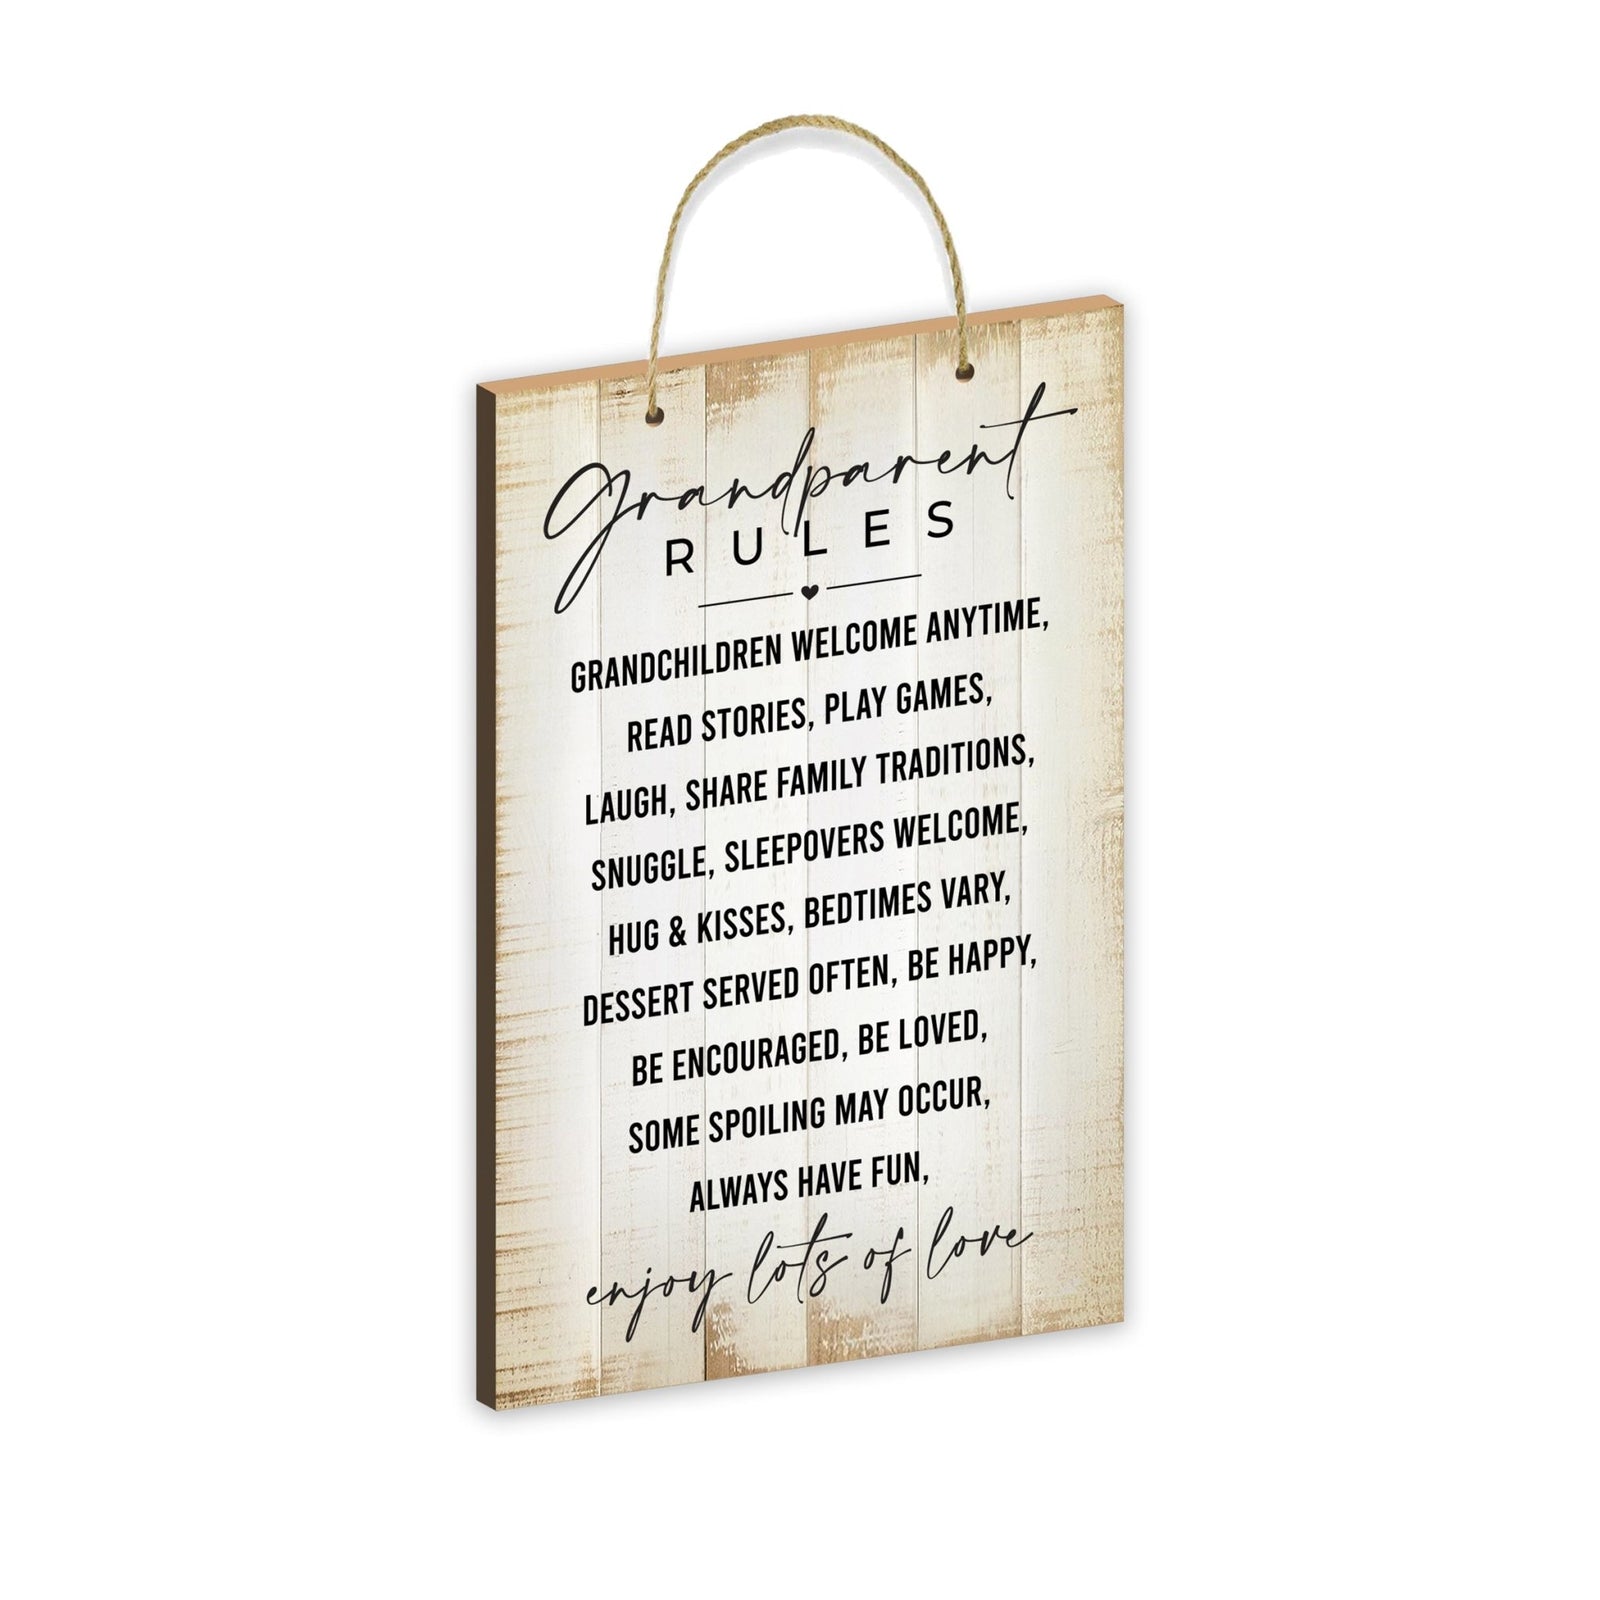 Inspirational Rustic Wooden Wall Hanging Rope Sign Kitchen Décor - Grandparent Rules